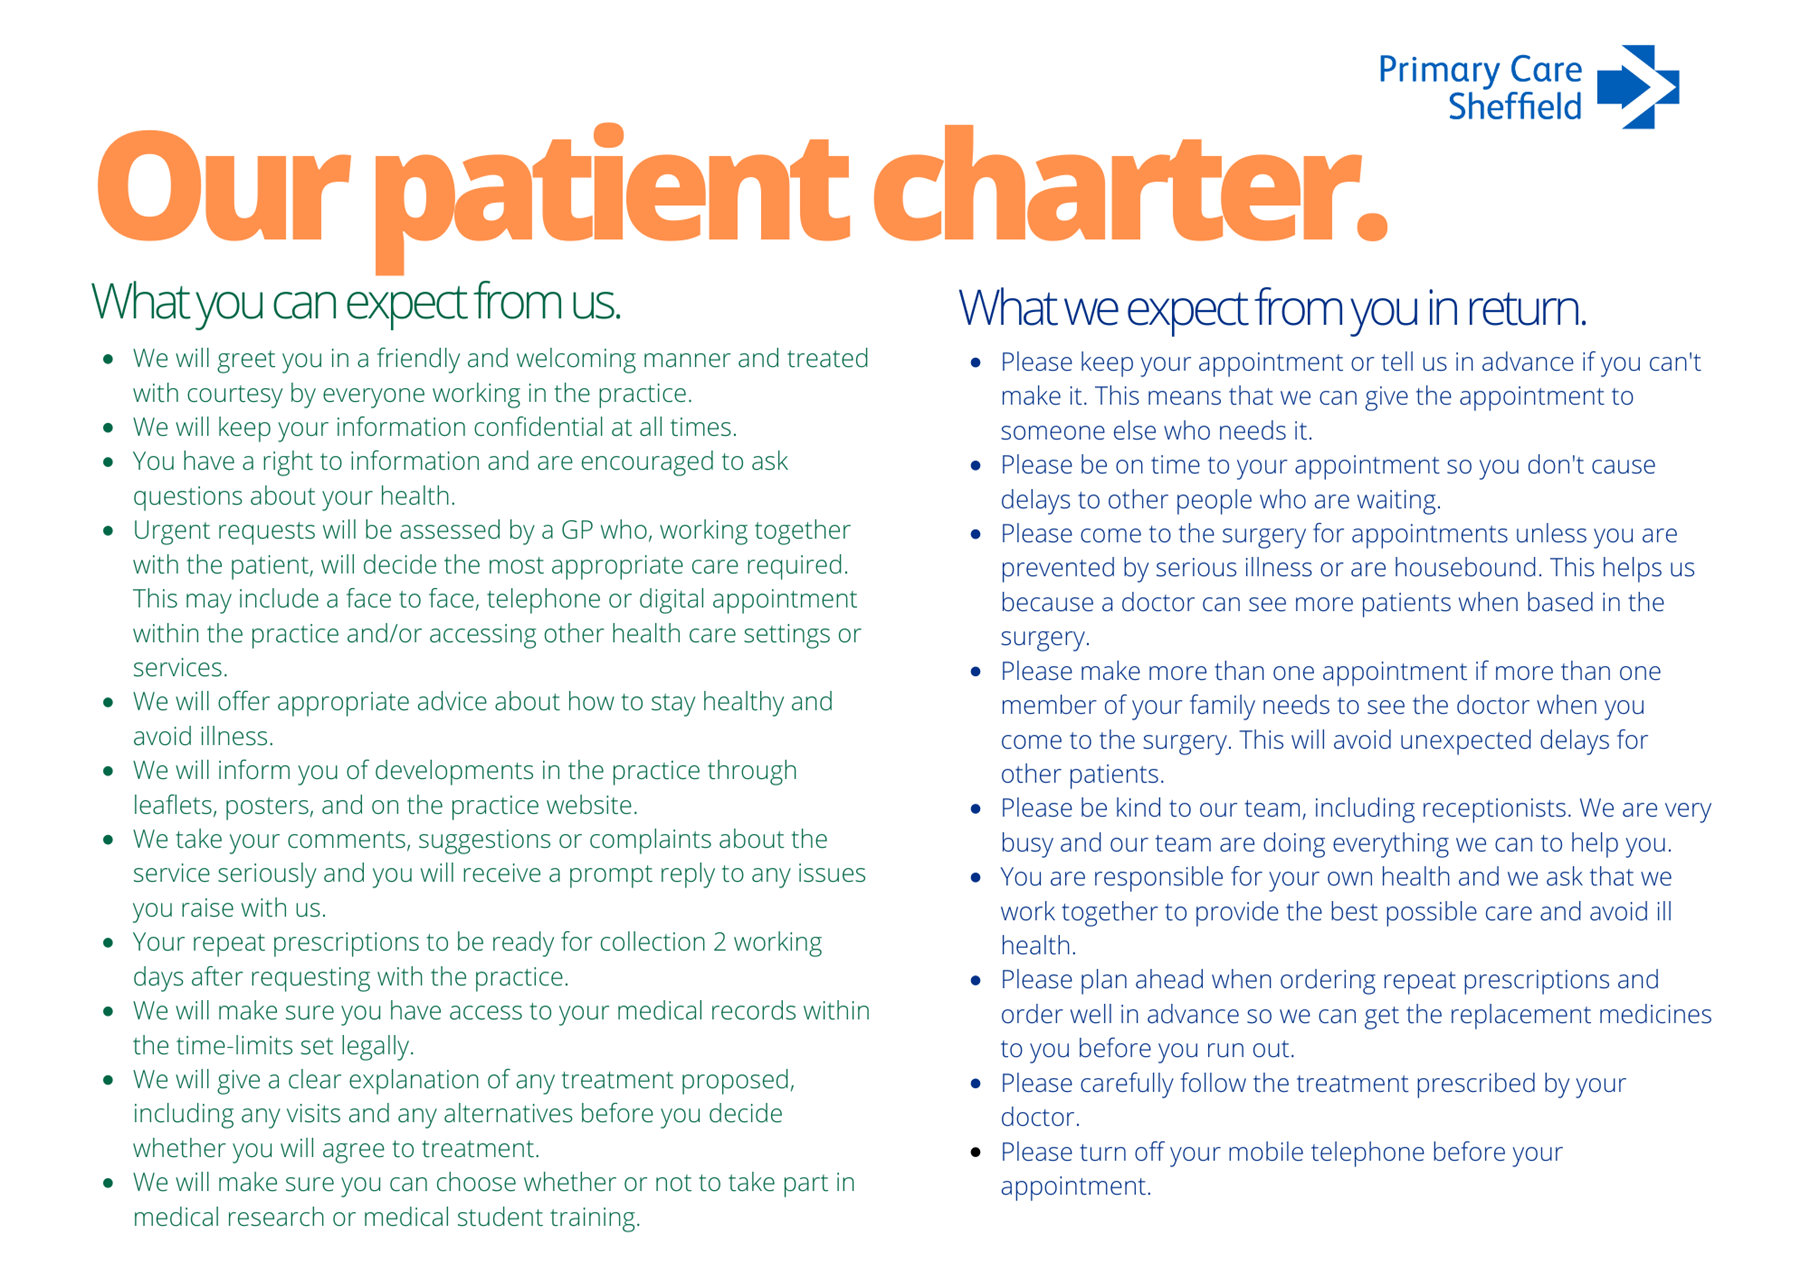 Our Patient charter